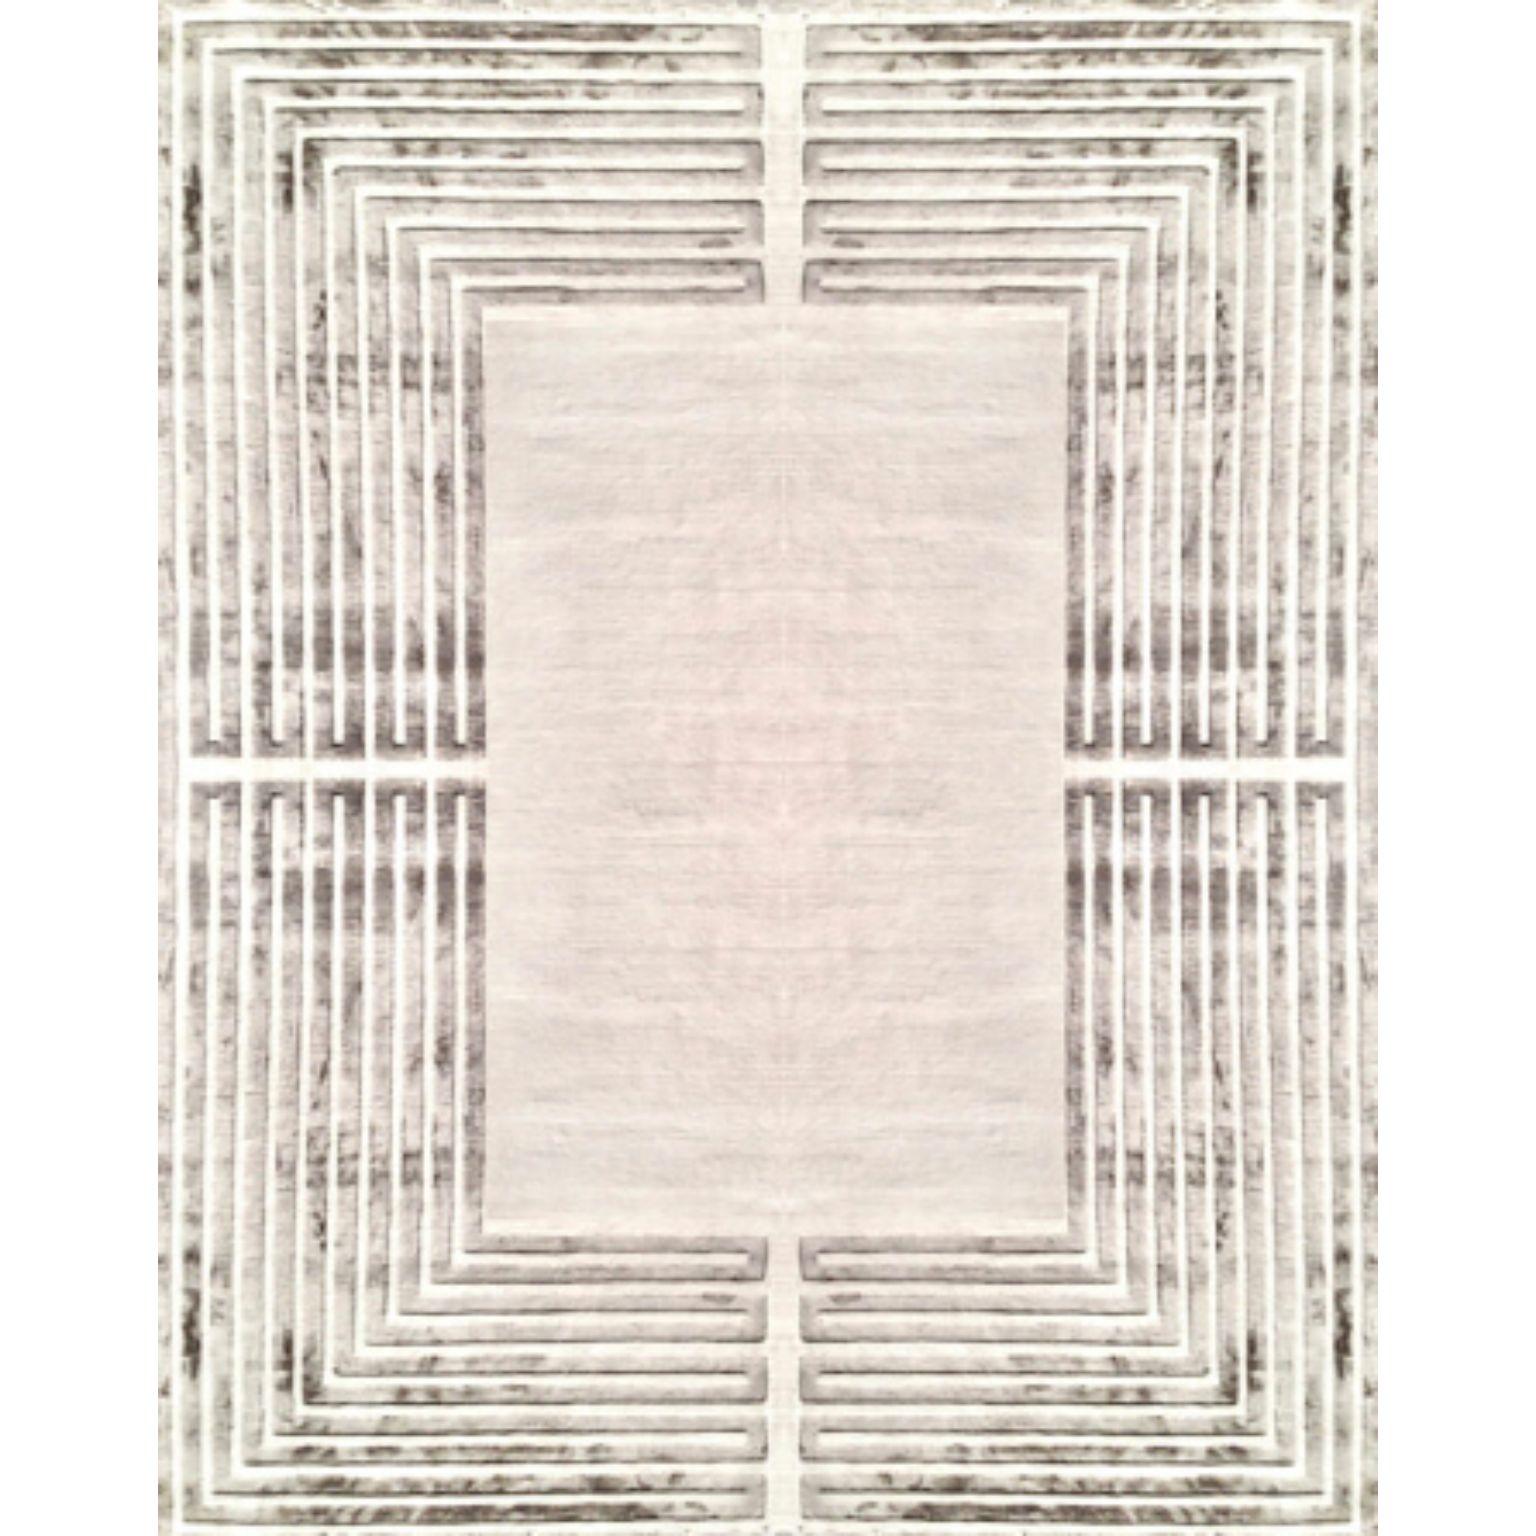 ECSTASY 200 Rug by Illulian
Dimensions: D300 x H200 cm 
Materials: Wool 80%, Silk 20%
Variations available and prices may vary according to materials and sizes.

Illulian, historic and prestigious rug company brand, internationally renowned in